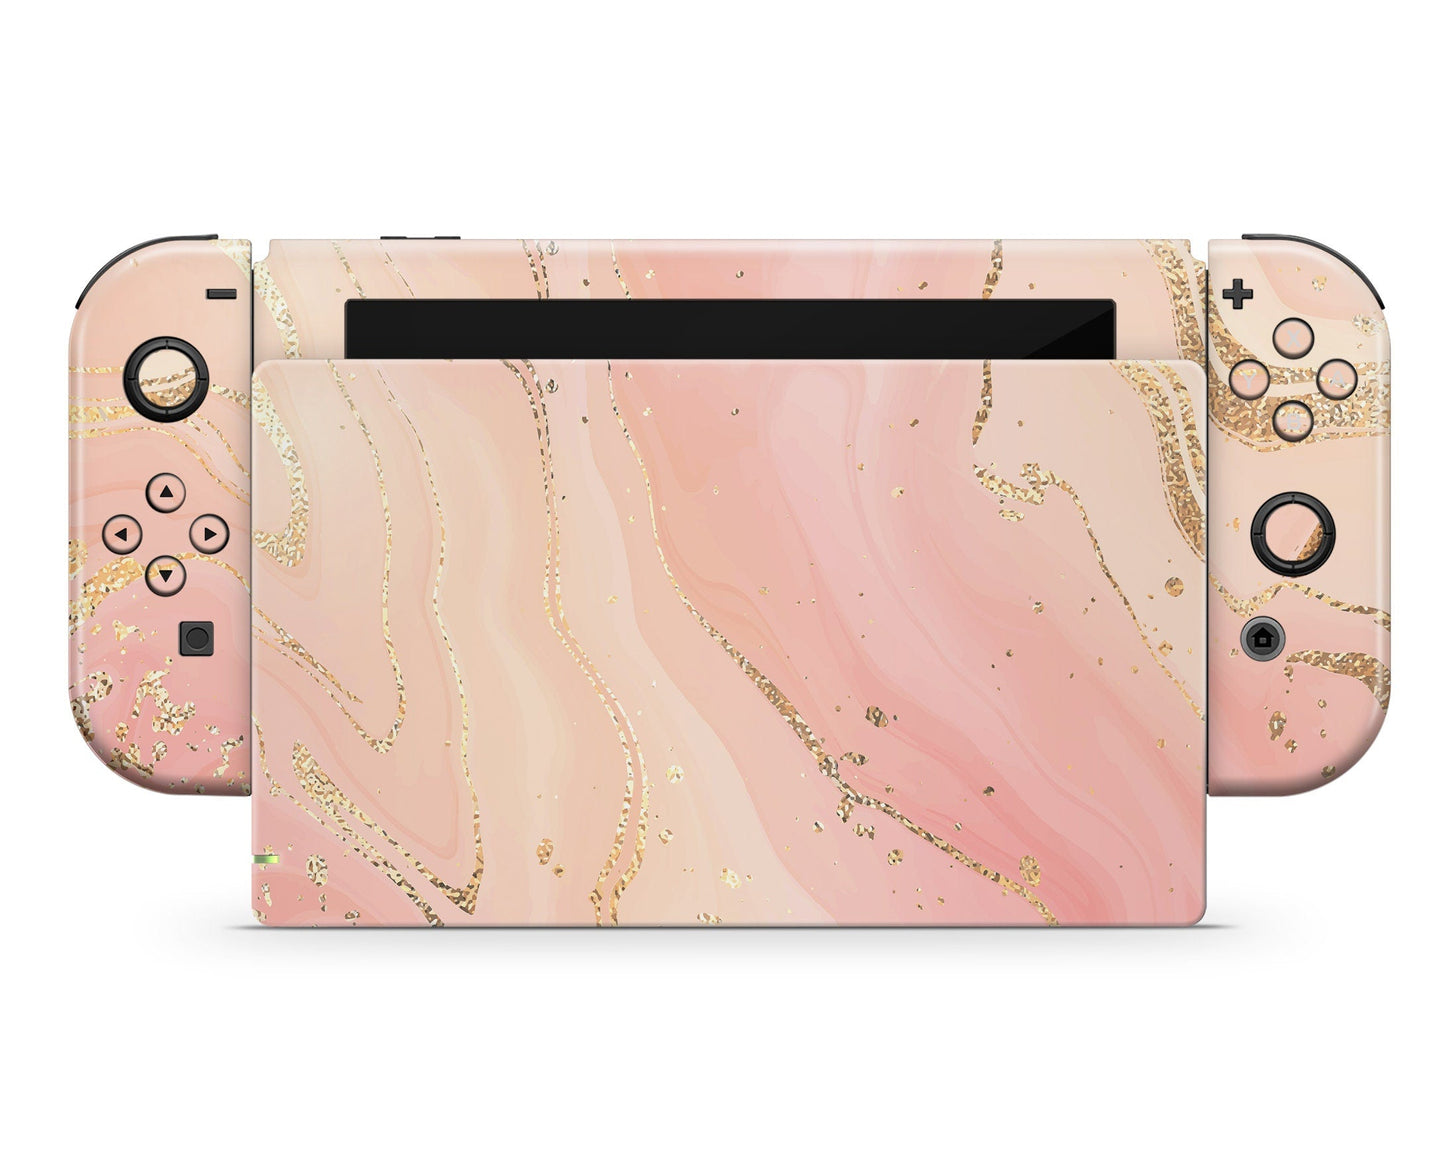 Lux Skins Nintendo Switch Ethereal Peach Pink Marble Full Set Skins - Pattern Marble Skin